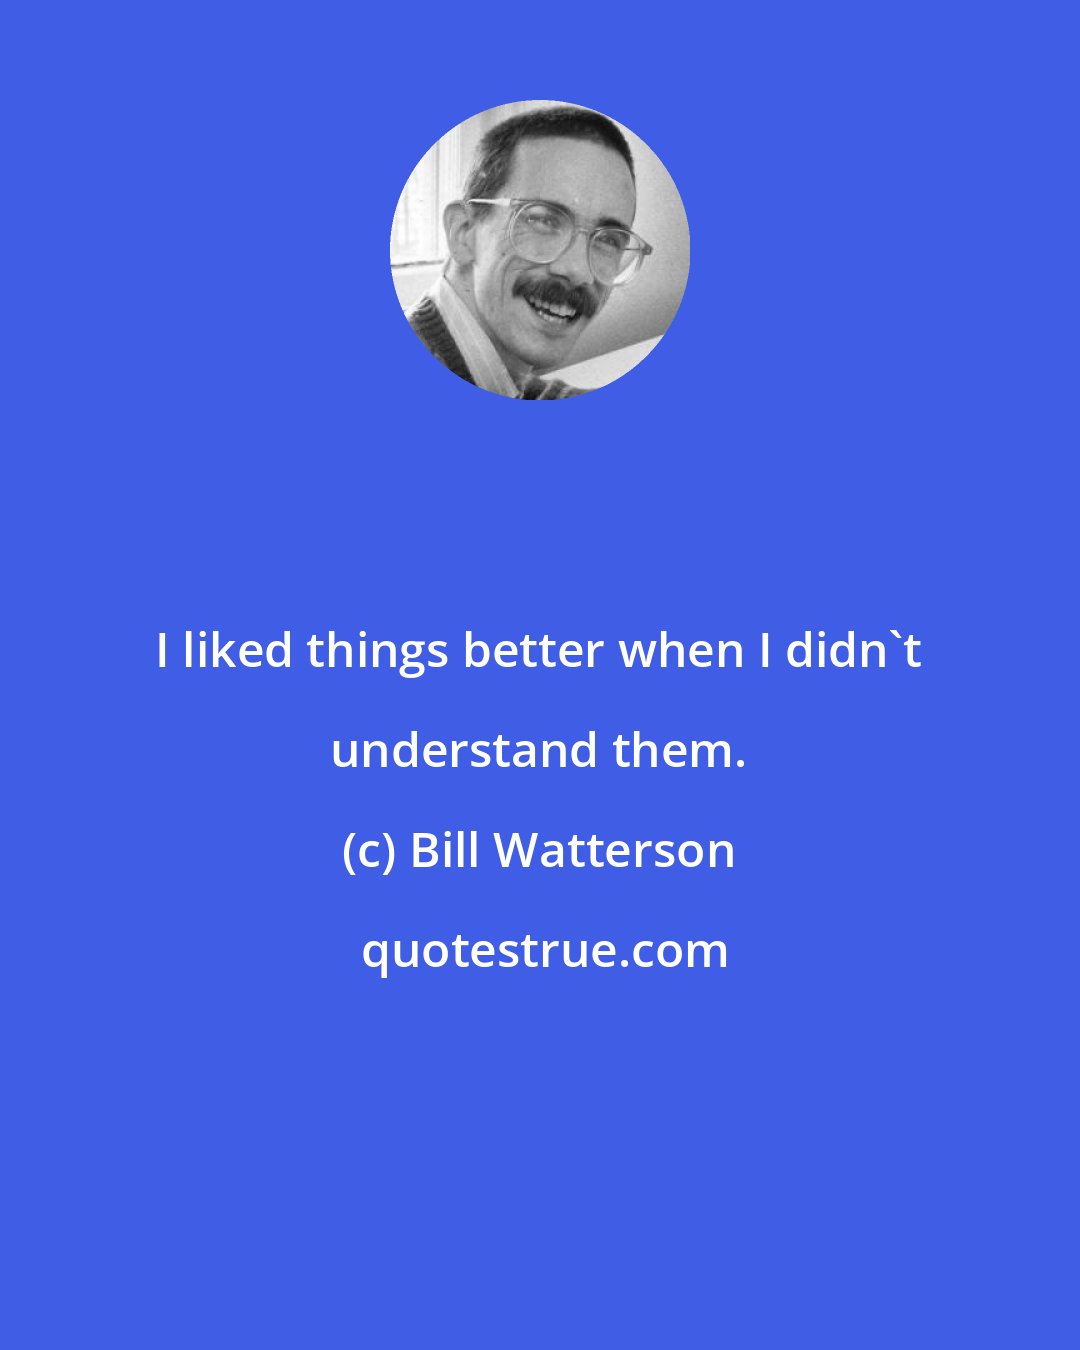 Bill Watterson: I liked things better when I didn't understand them.